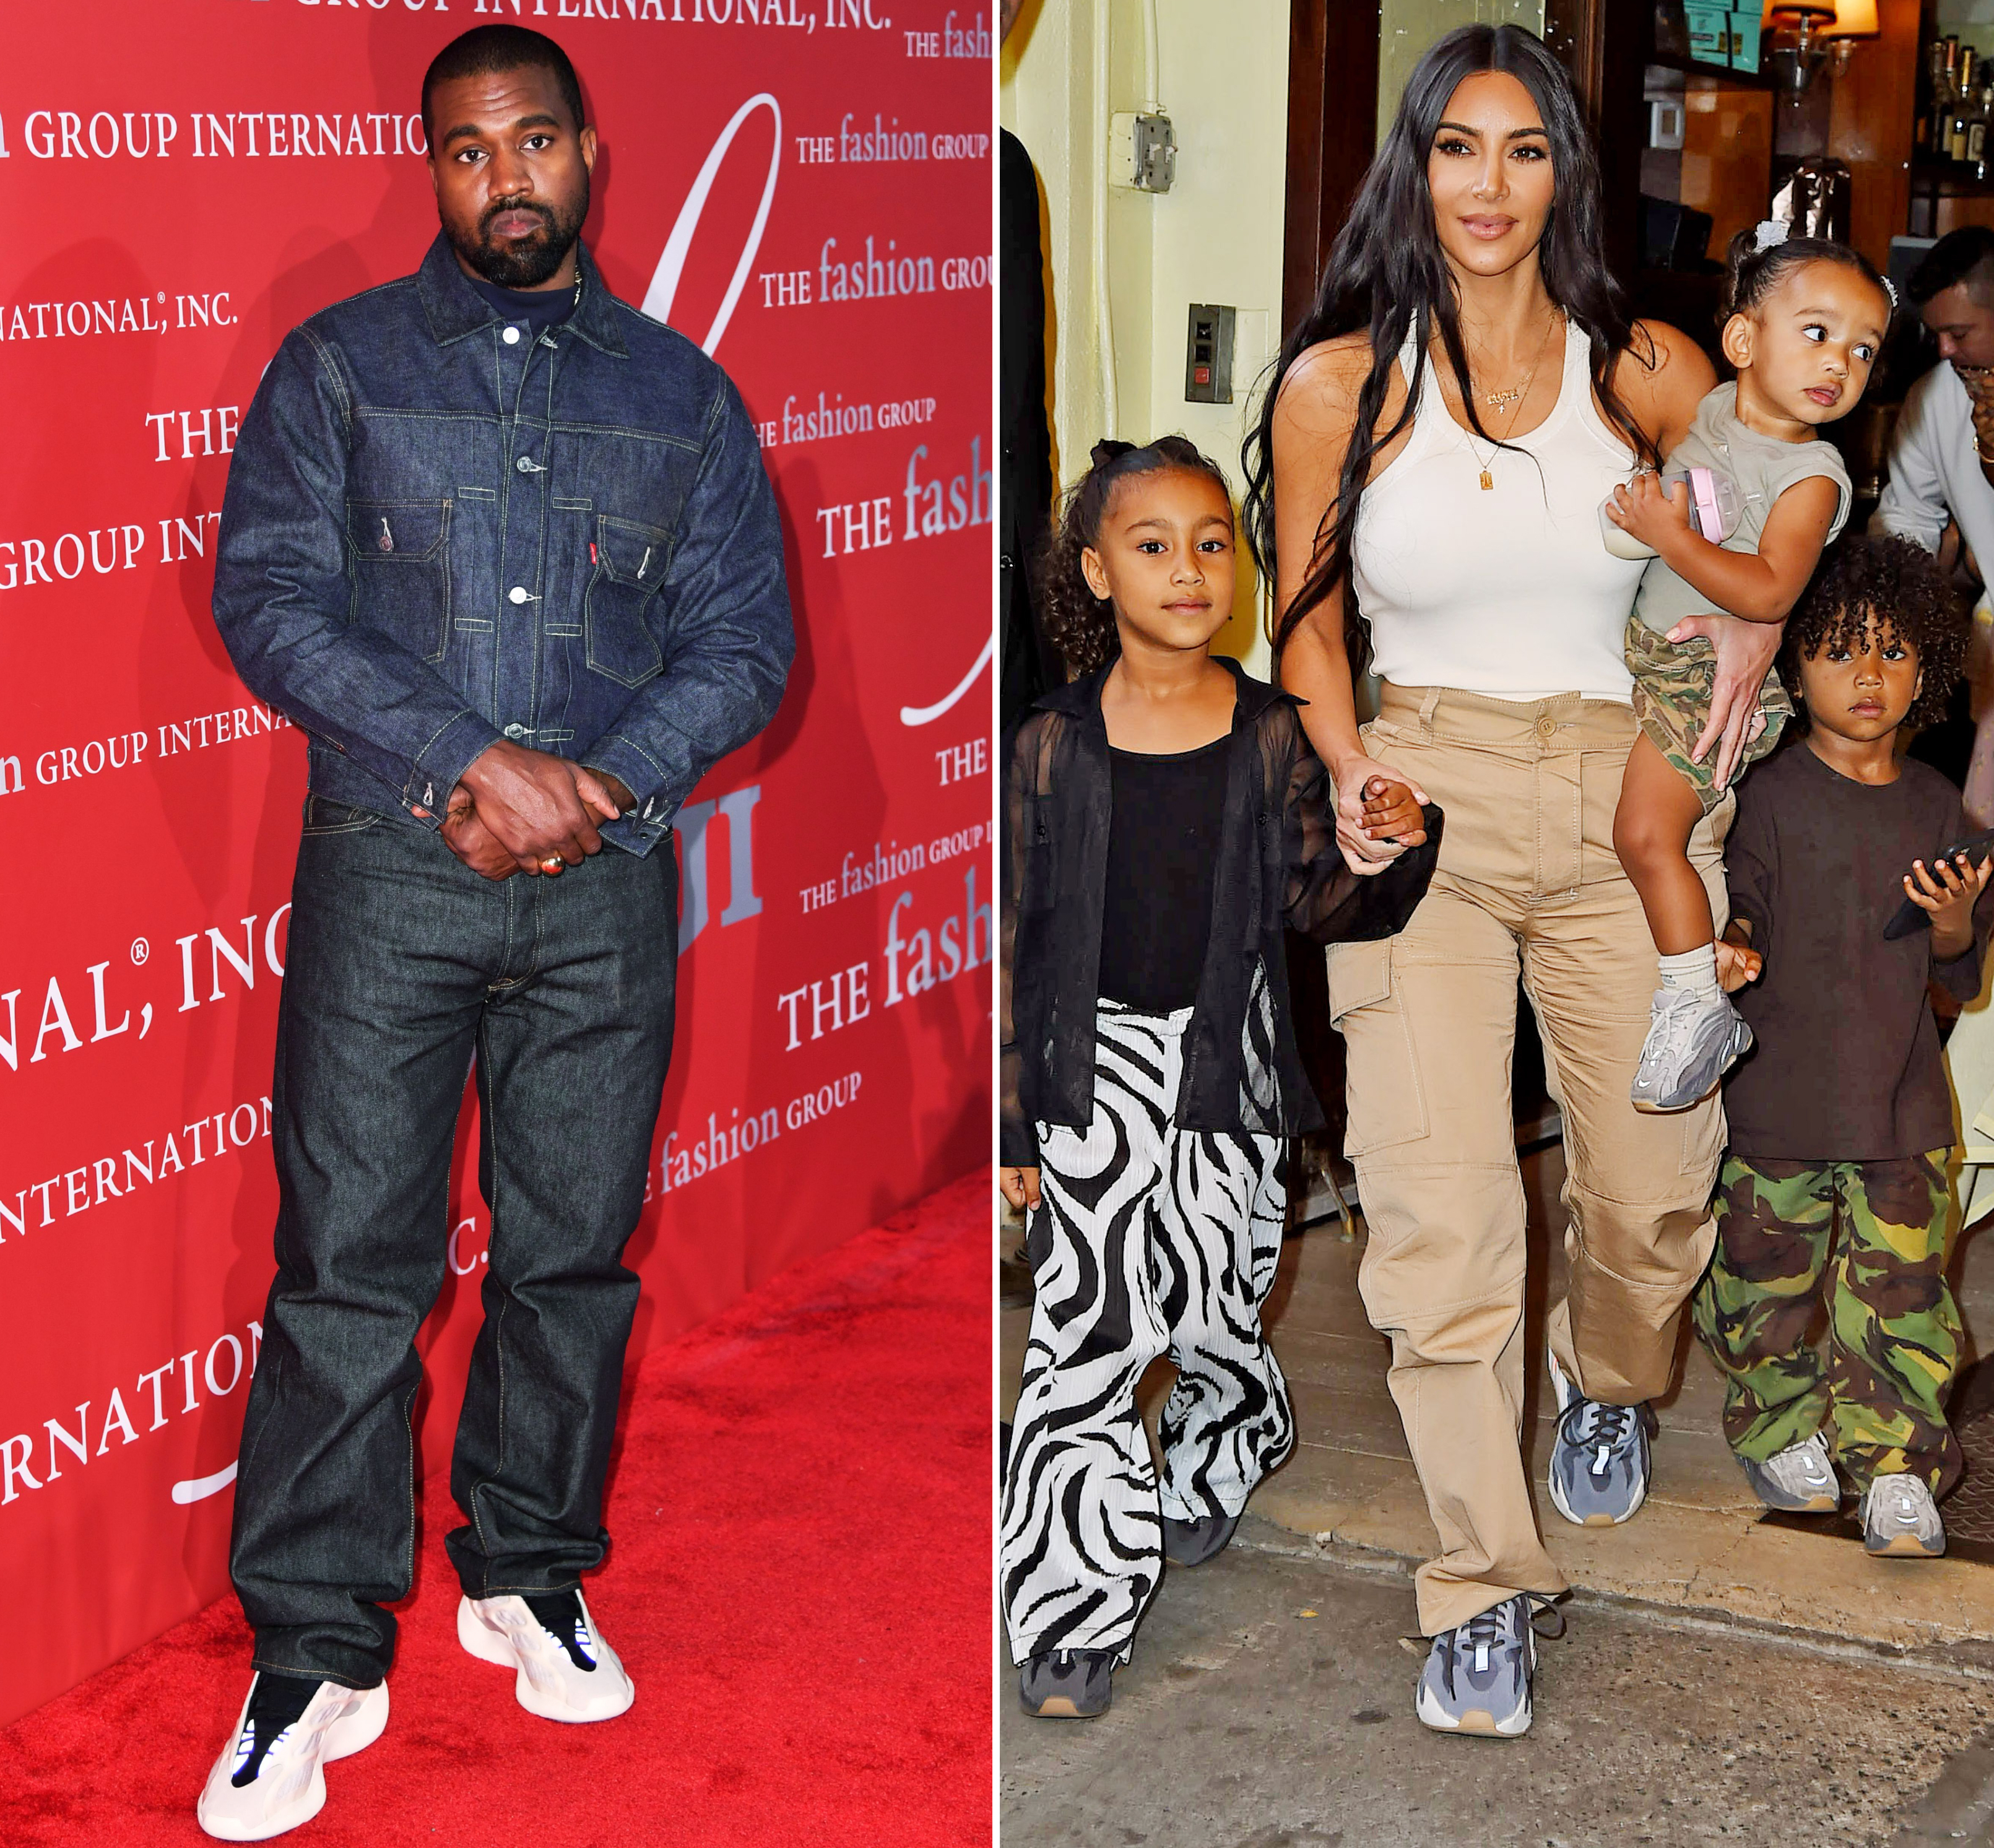 Kanye West Leaves Out Kim And Kids On Vision Board Amid Drama